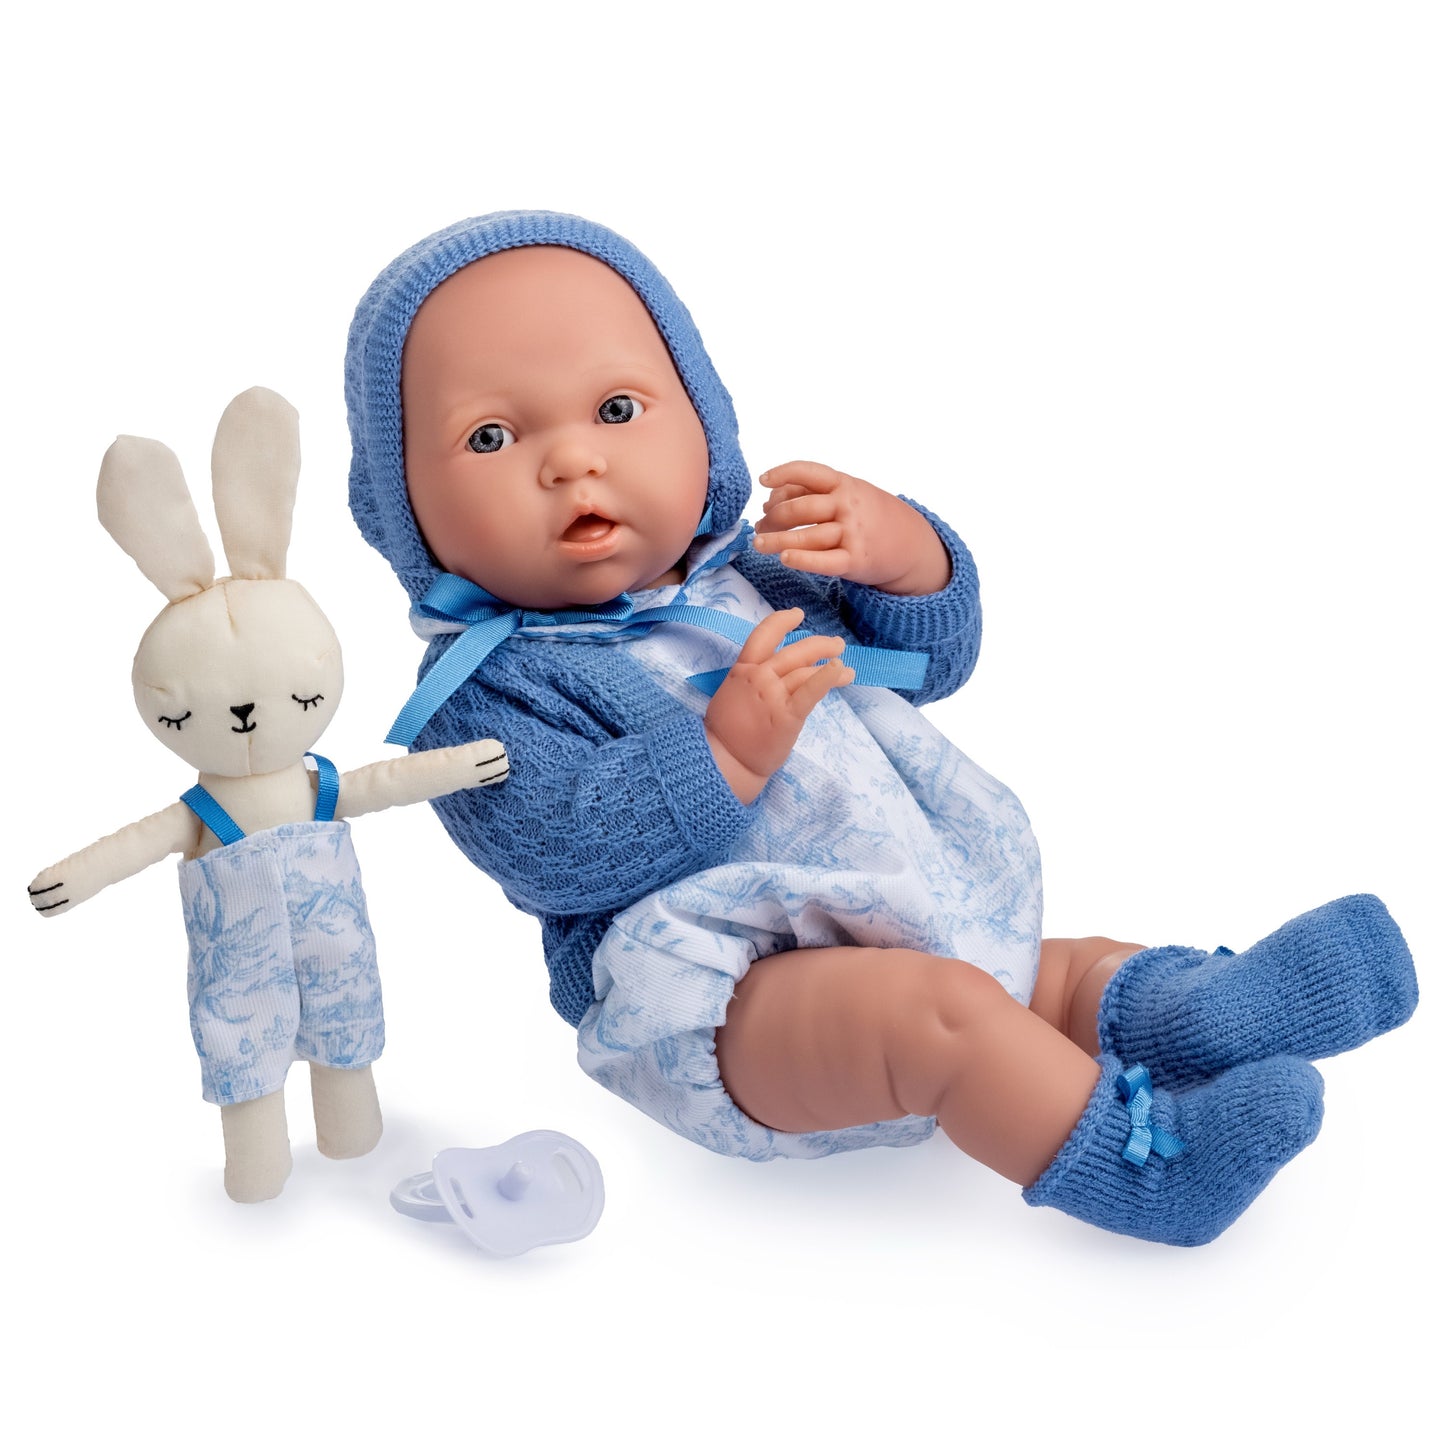 JC Toys La Newborn ROYAL Collection 15" All-Vinyl Anatomically Correct Real Boy Baby Doll Blue Gift Set Ages 2+